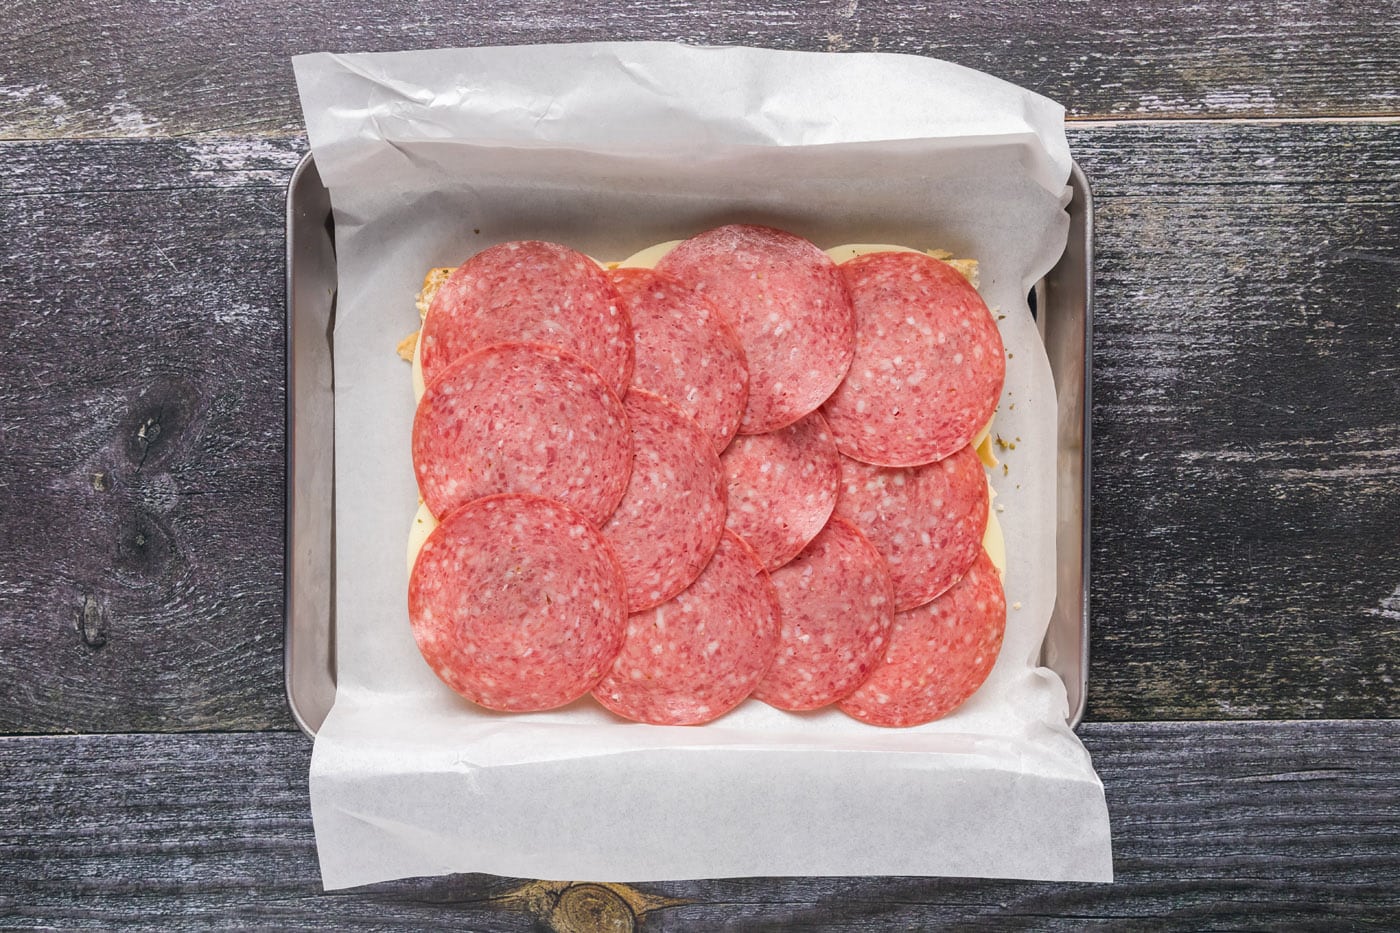 layer of salami over provolone sliders